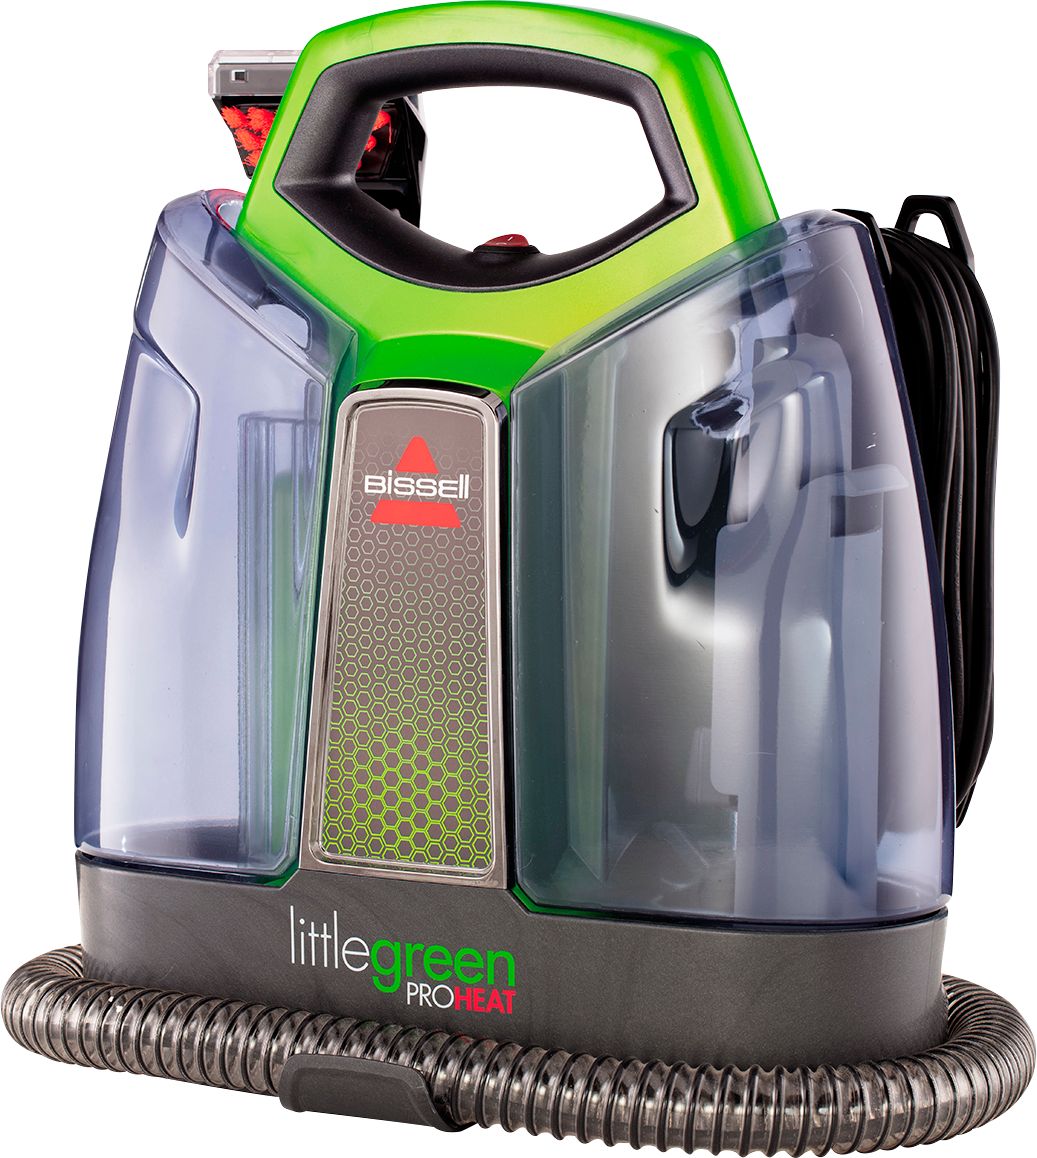 BISSELL Little Green Portable Carpet Cleaner 3369